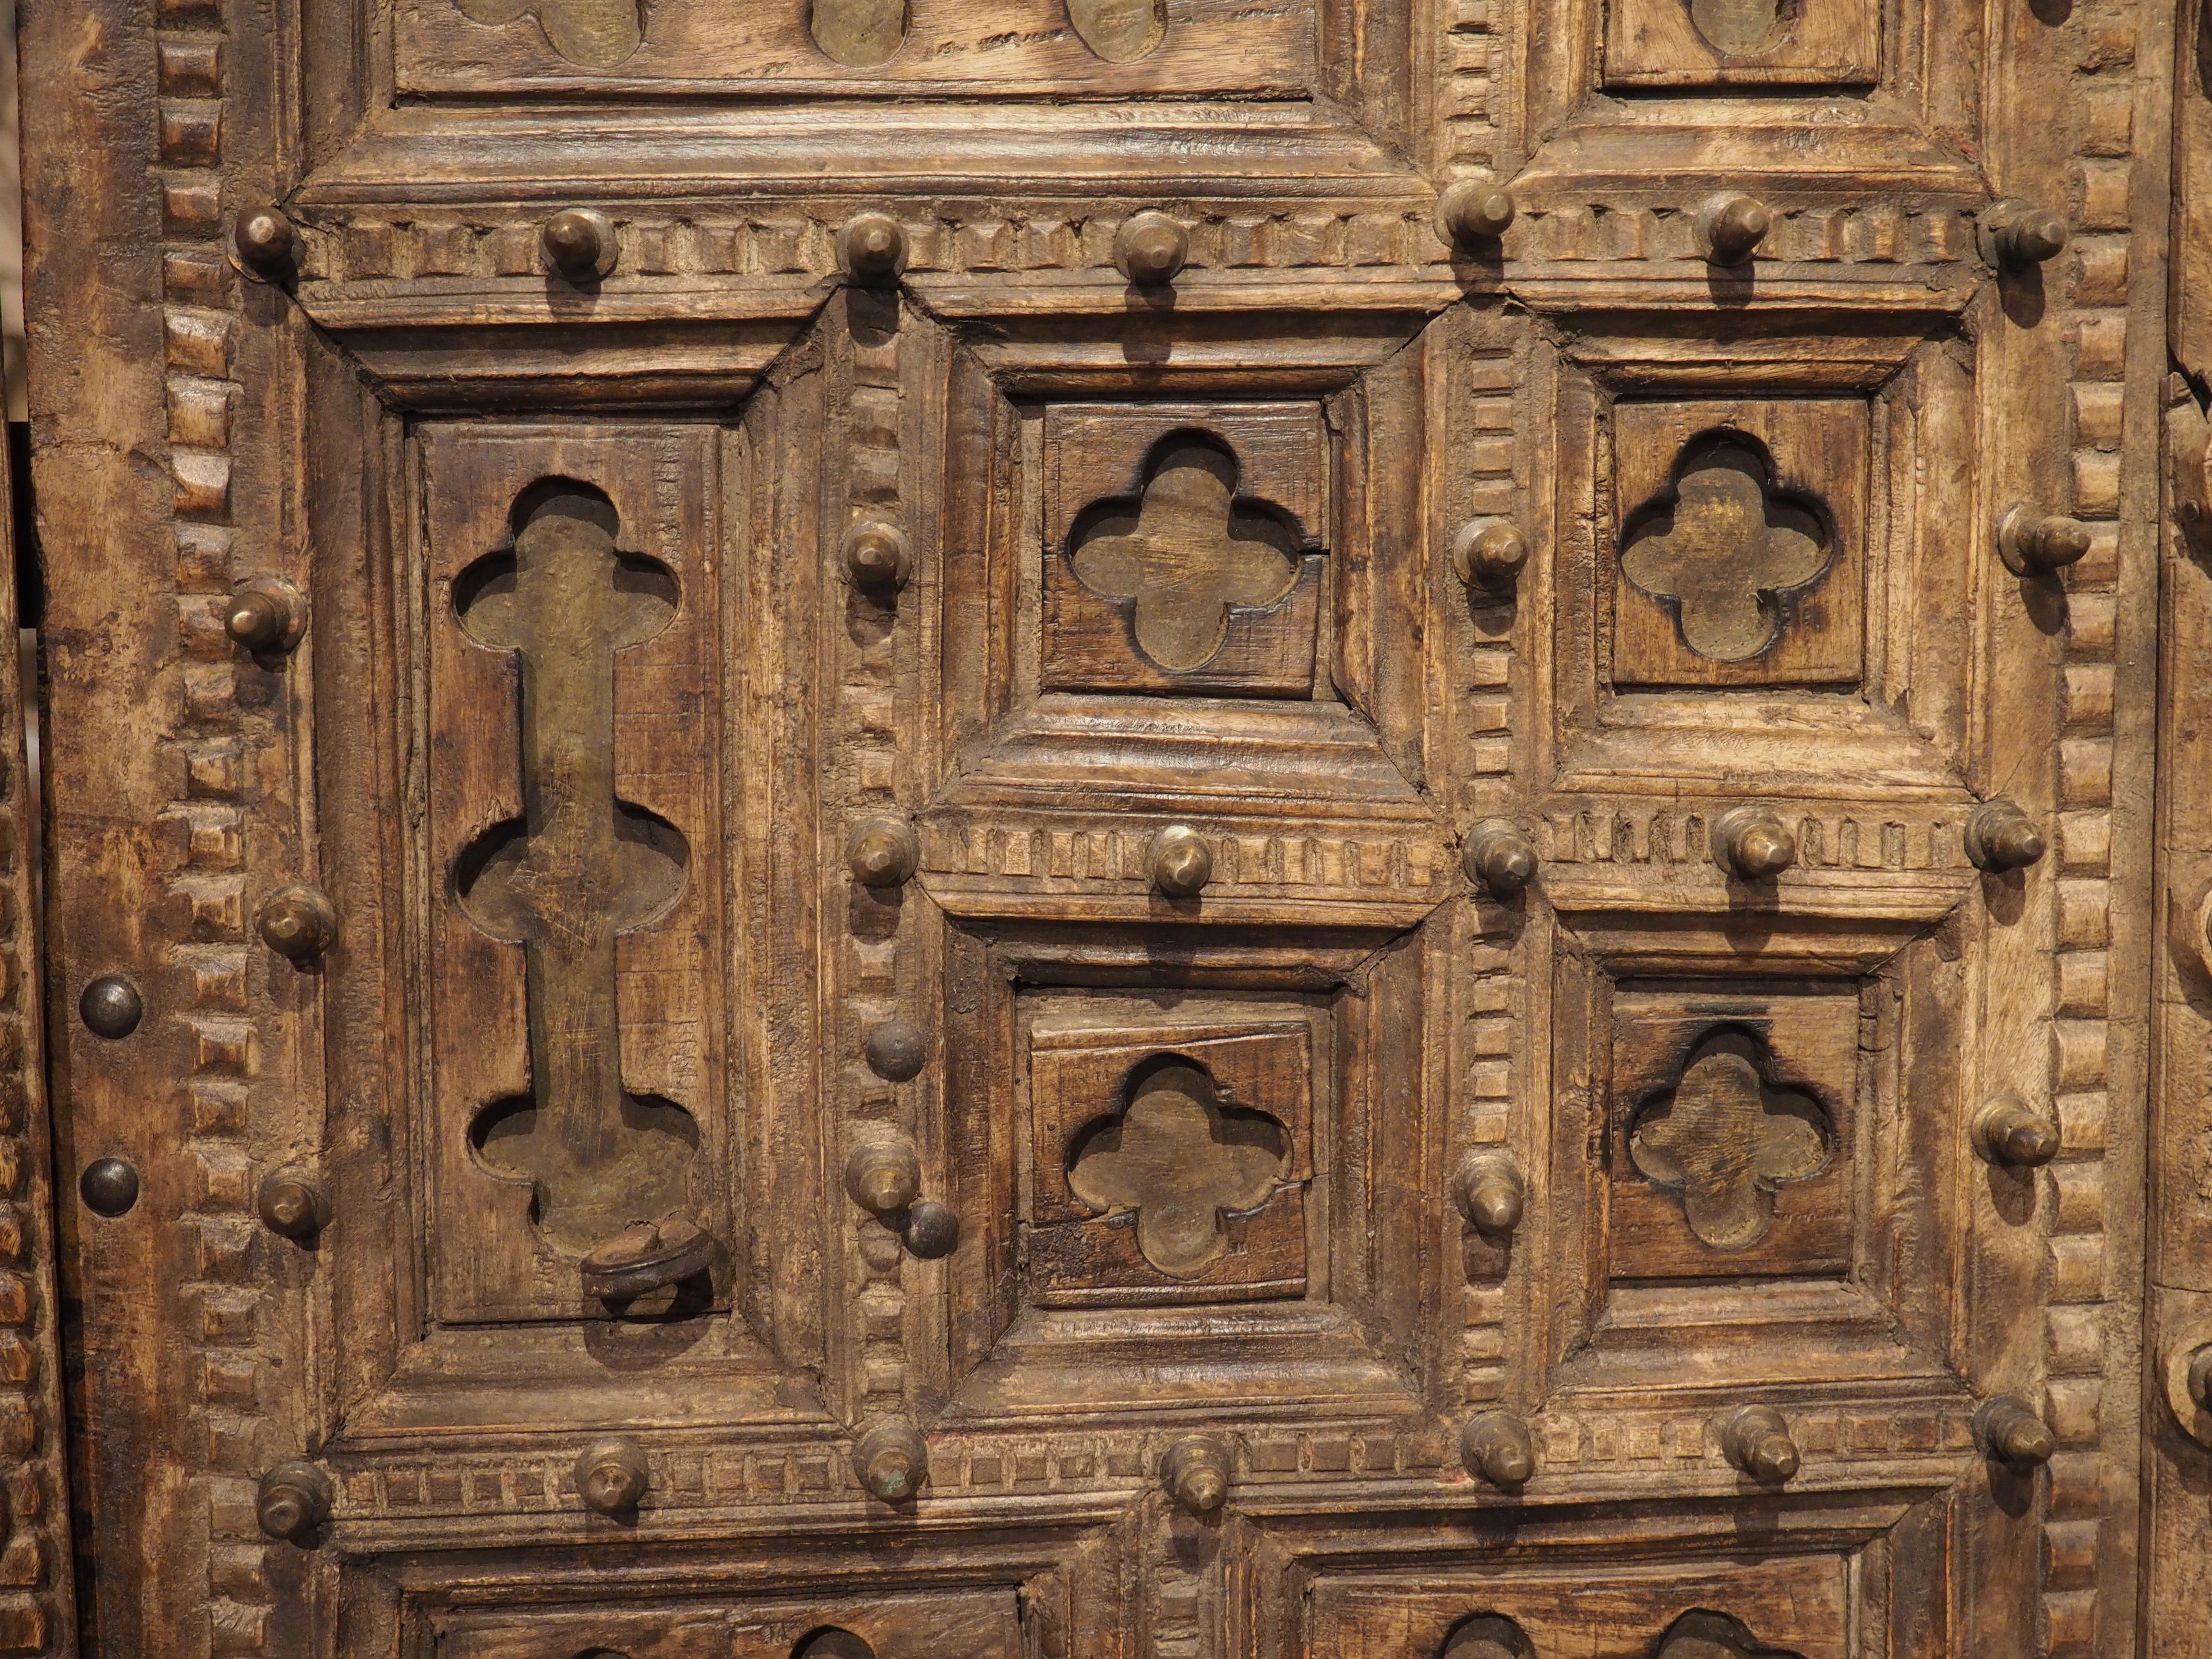 This pair of antique doors was hand-carved from teakwood in India during the 1800’s. The tall and slender doors are adorned with rectilinear panels of various sizes and orientation. Each quadrilateral features cavetto molding and has been incised